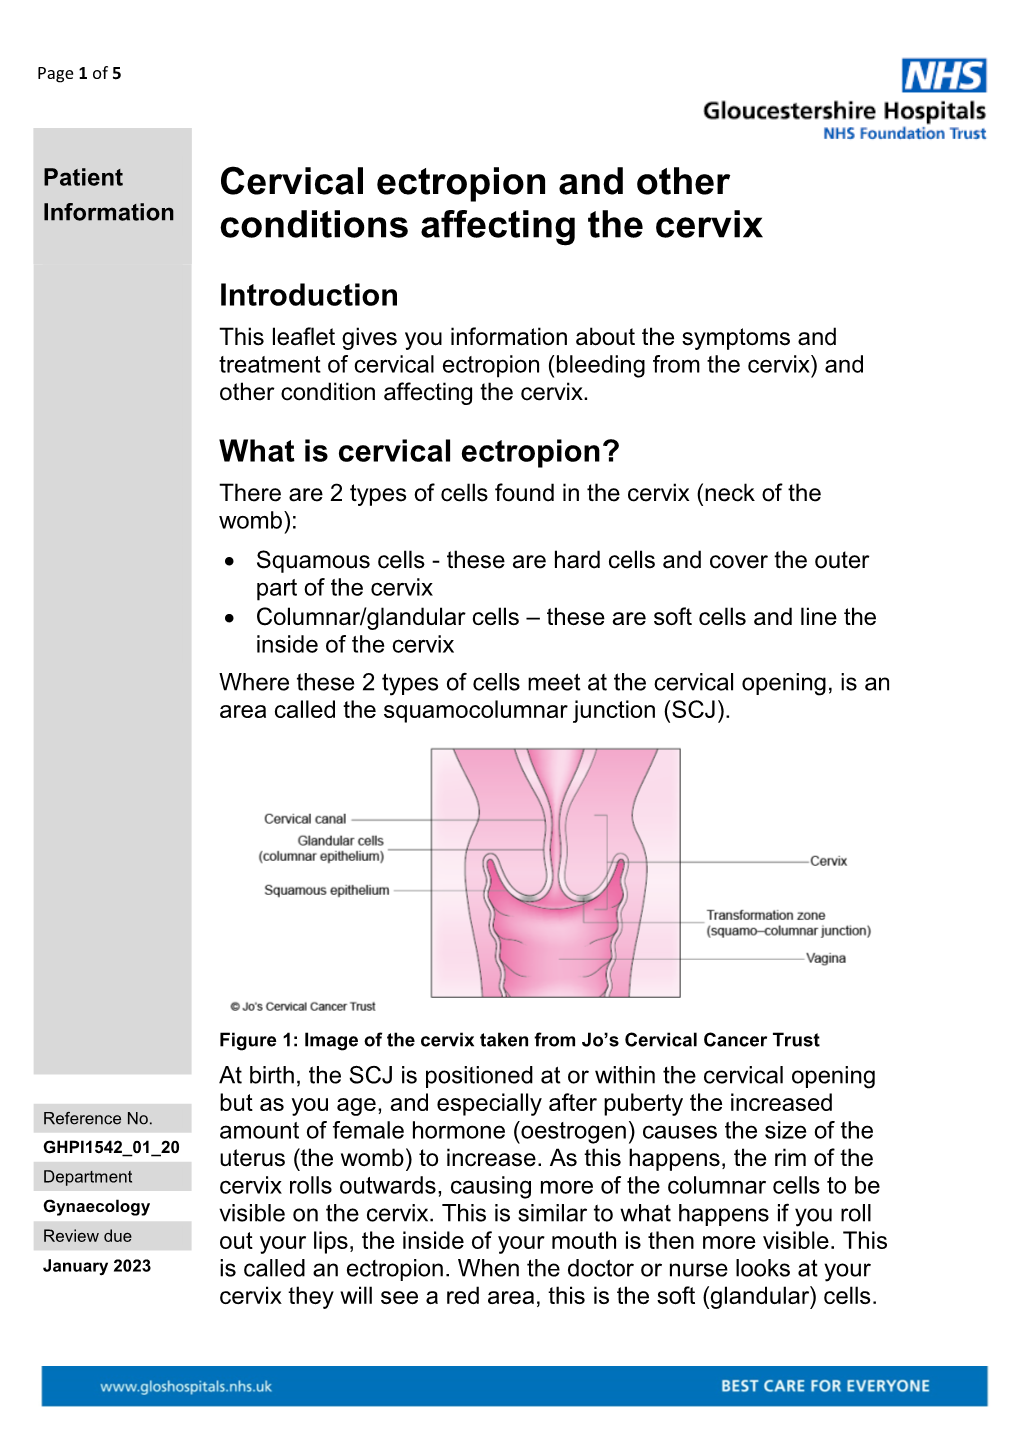 Cervical Ectropion and Other Conditions Affecting the Cervix